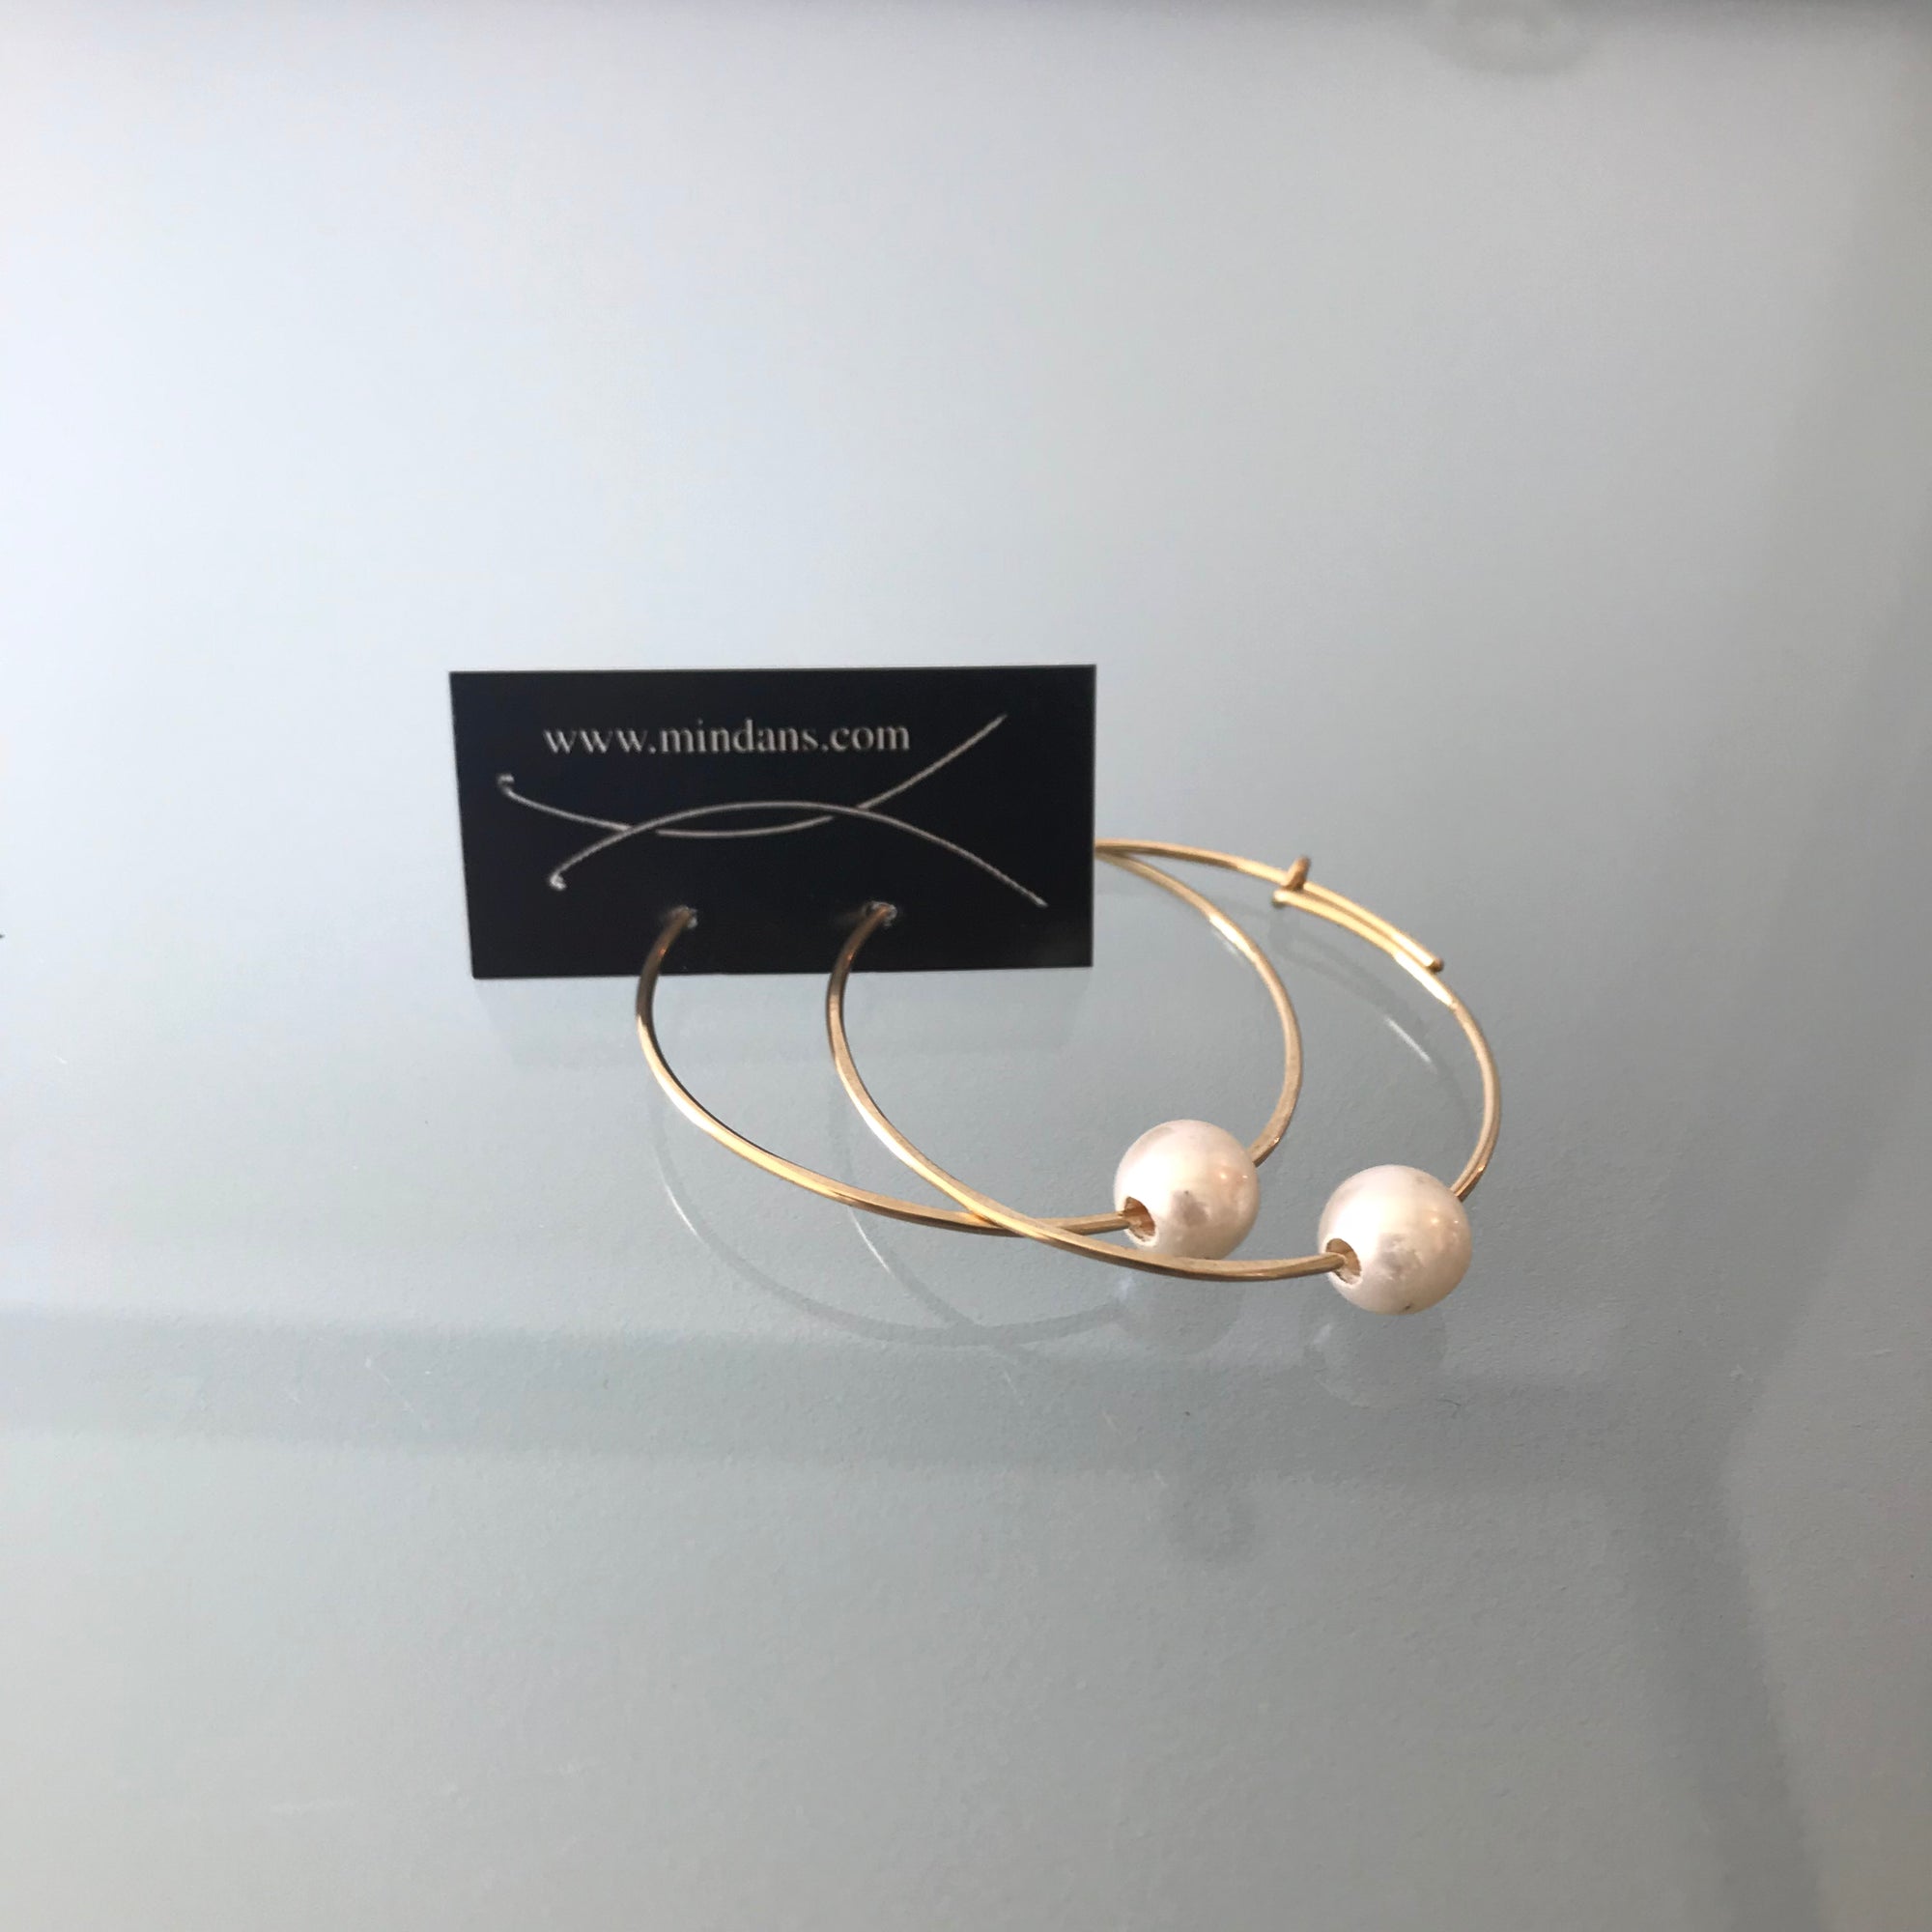 Mindan's Designs - Jewellery -Gold or Rose Gold Hammered Hoops with Pearls